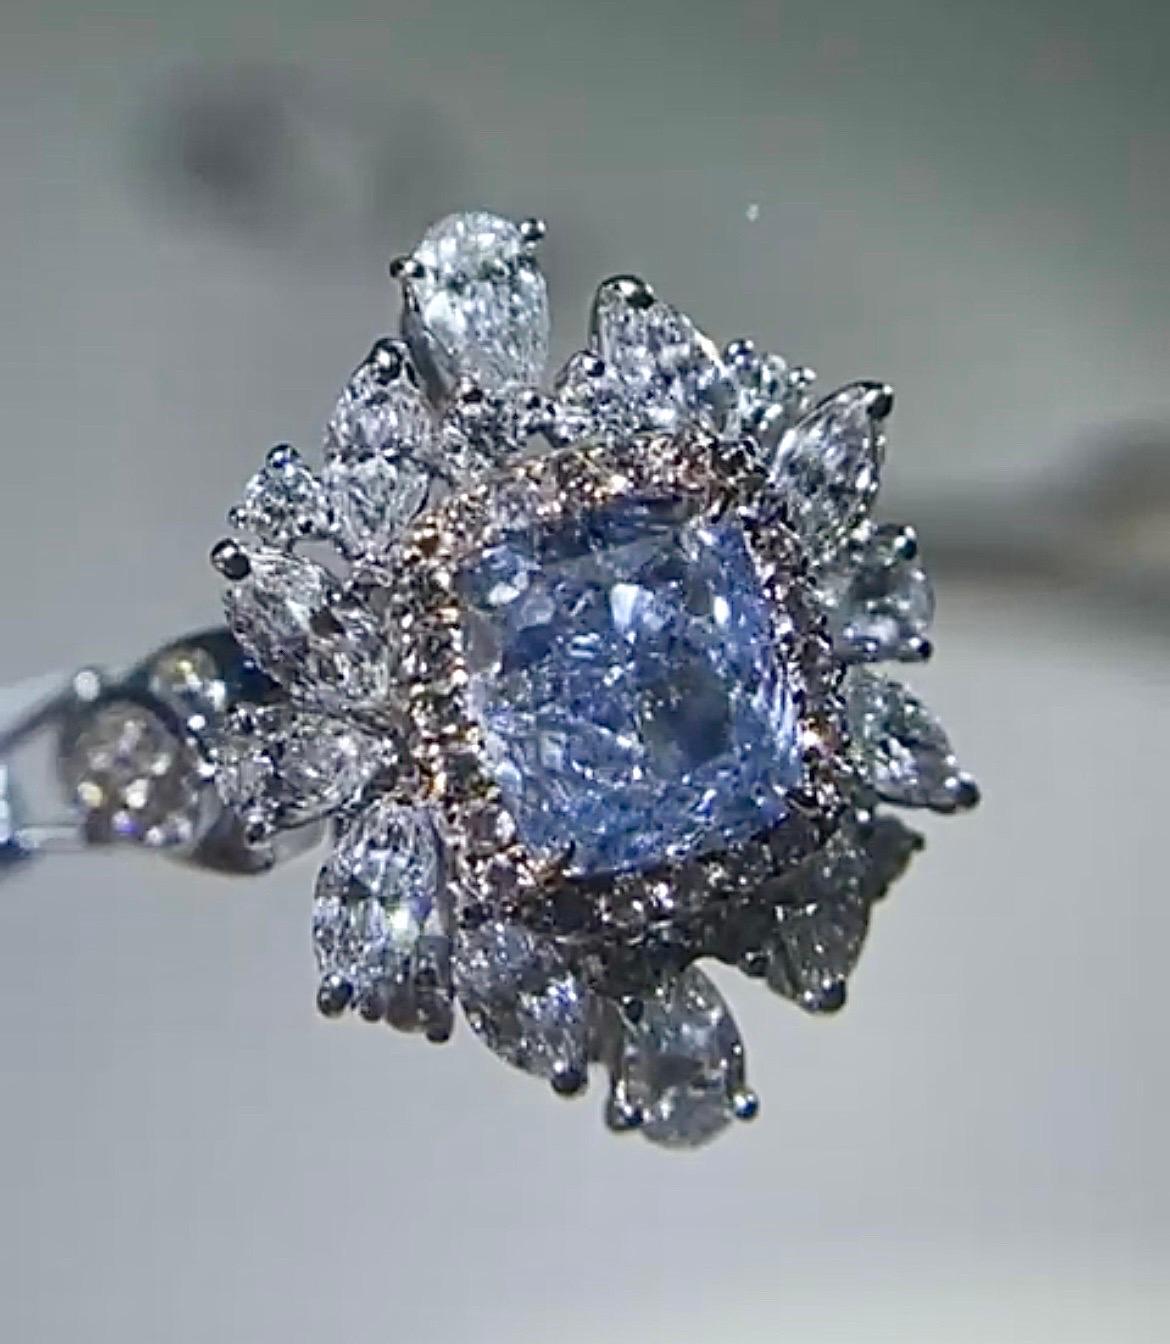 An exquisite GIA certified 2.02 carat cushion shaped Blue Diamond center stone, SI2 clarity, faint blue color - with VS quality white diamonds surrounding it set in solid 18K Gold. It is a convertible ring into pendant. It is a one of a kind,